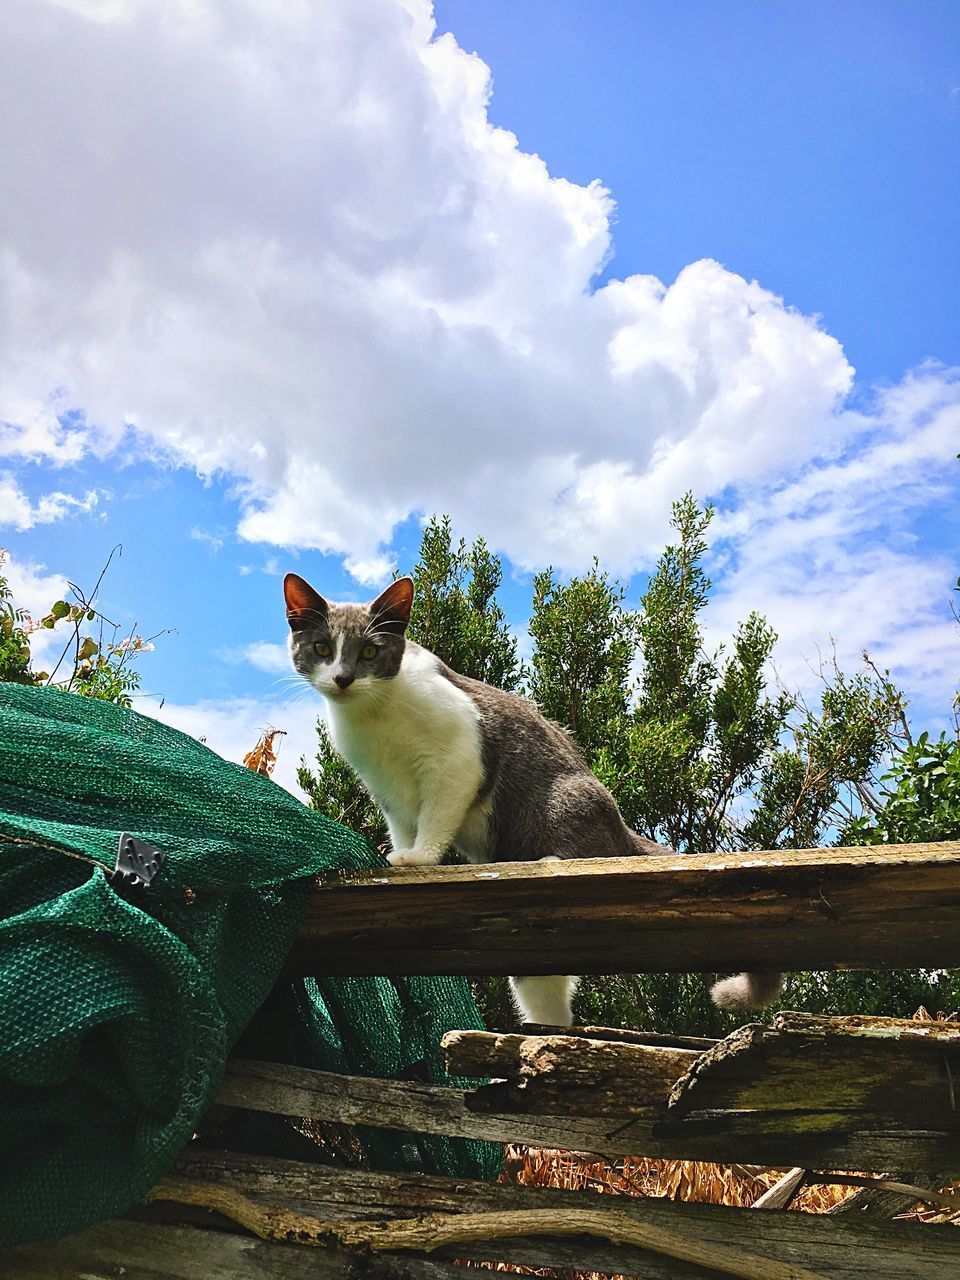 LOW ANGLE VIEW OF A CAT SITTING ON WOOD